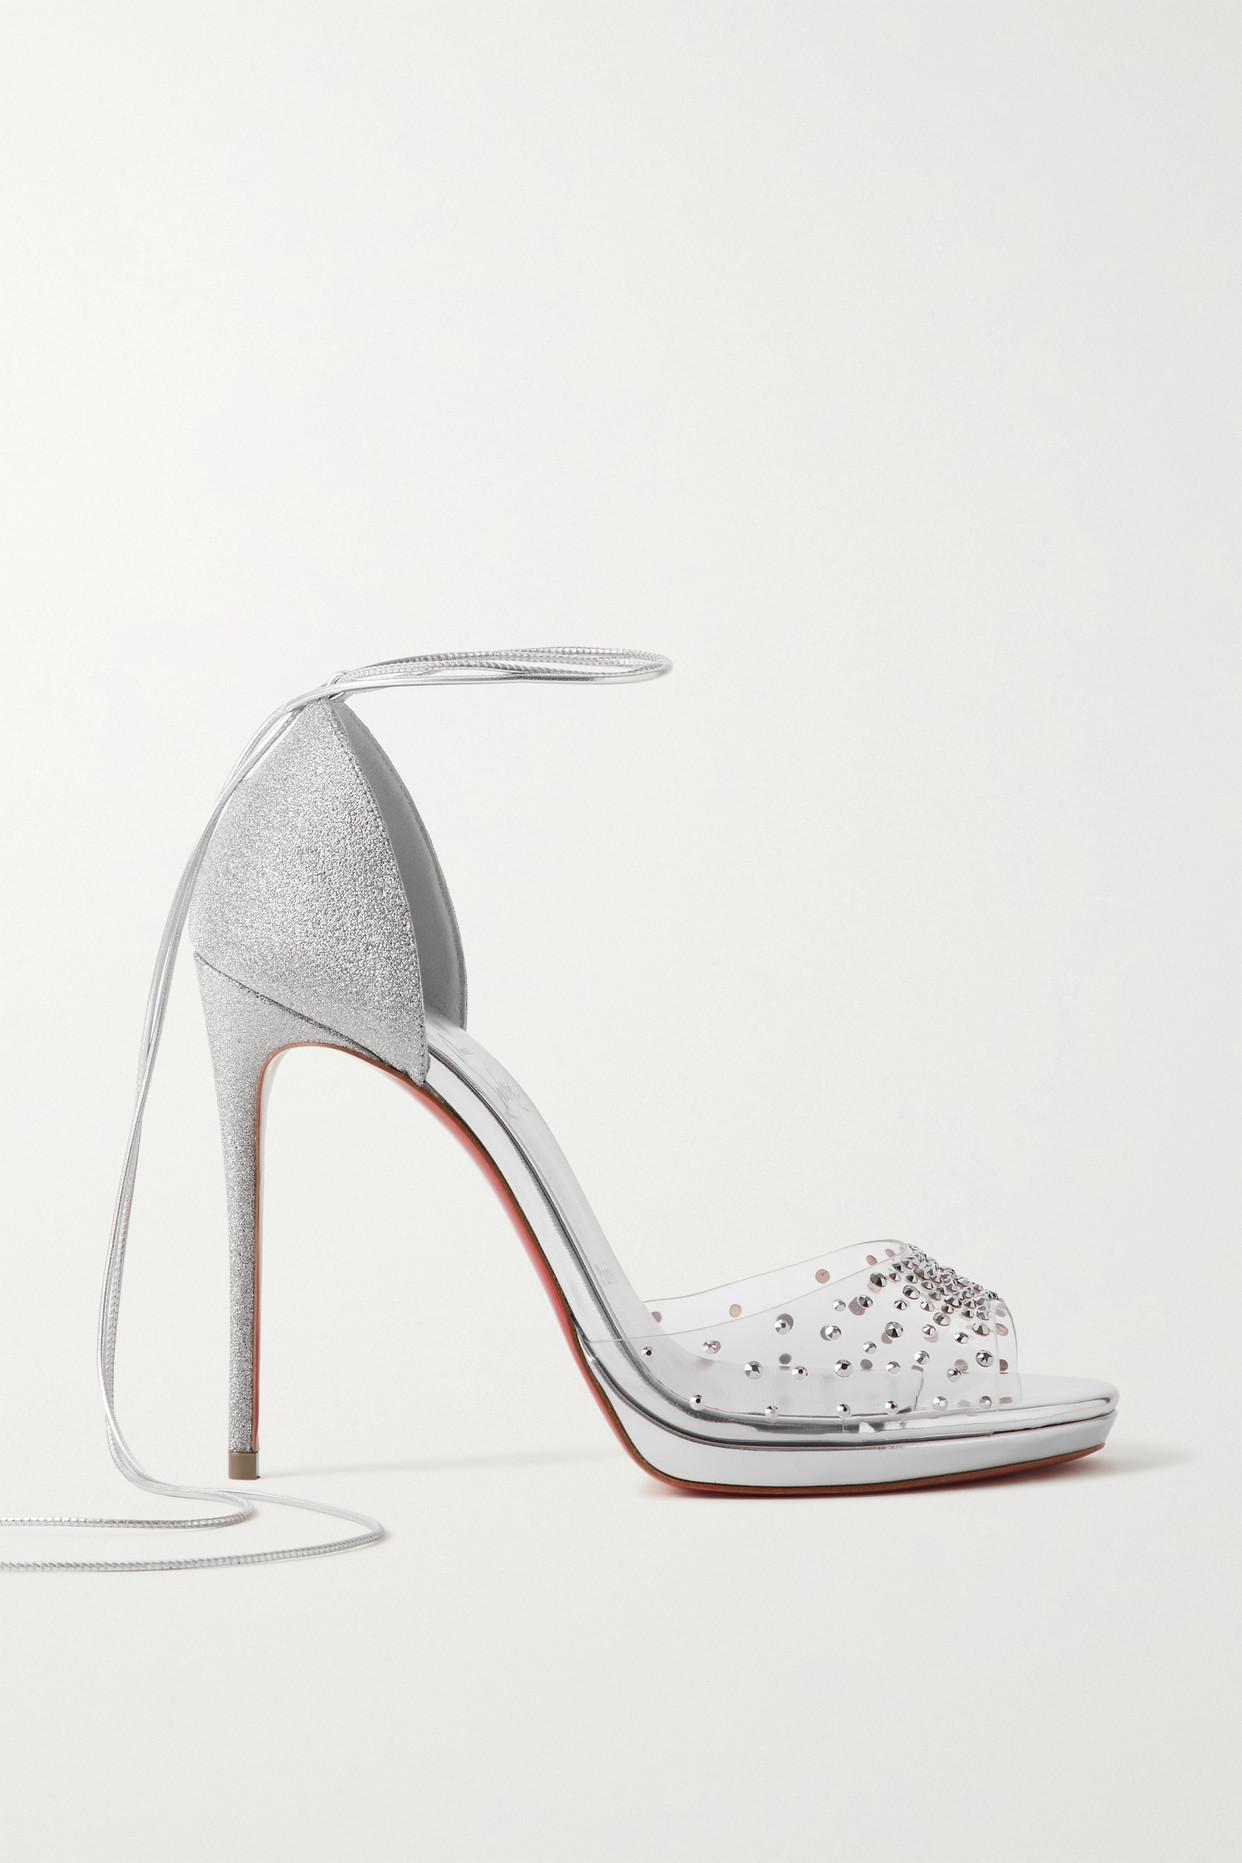 Christian Louboutin PVC And Glitter Leather Very Strass